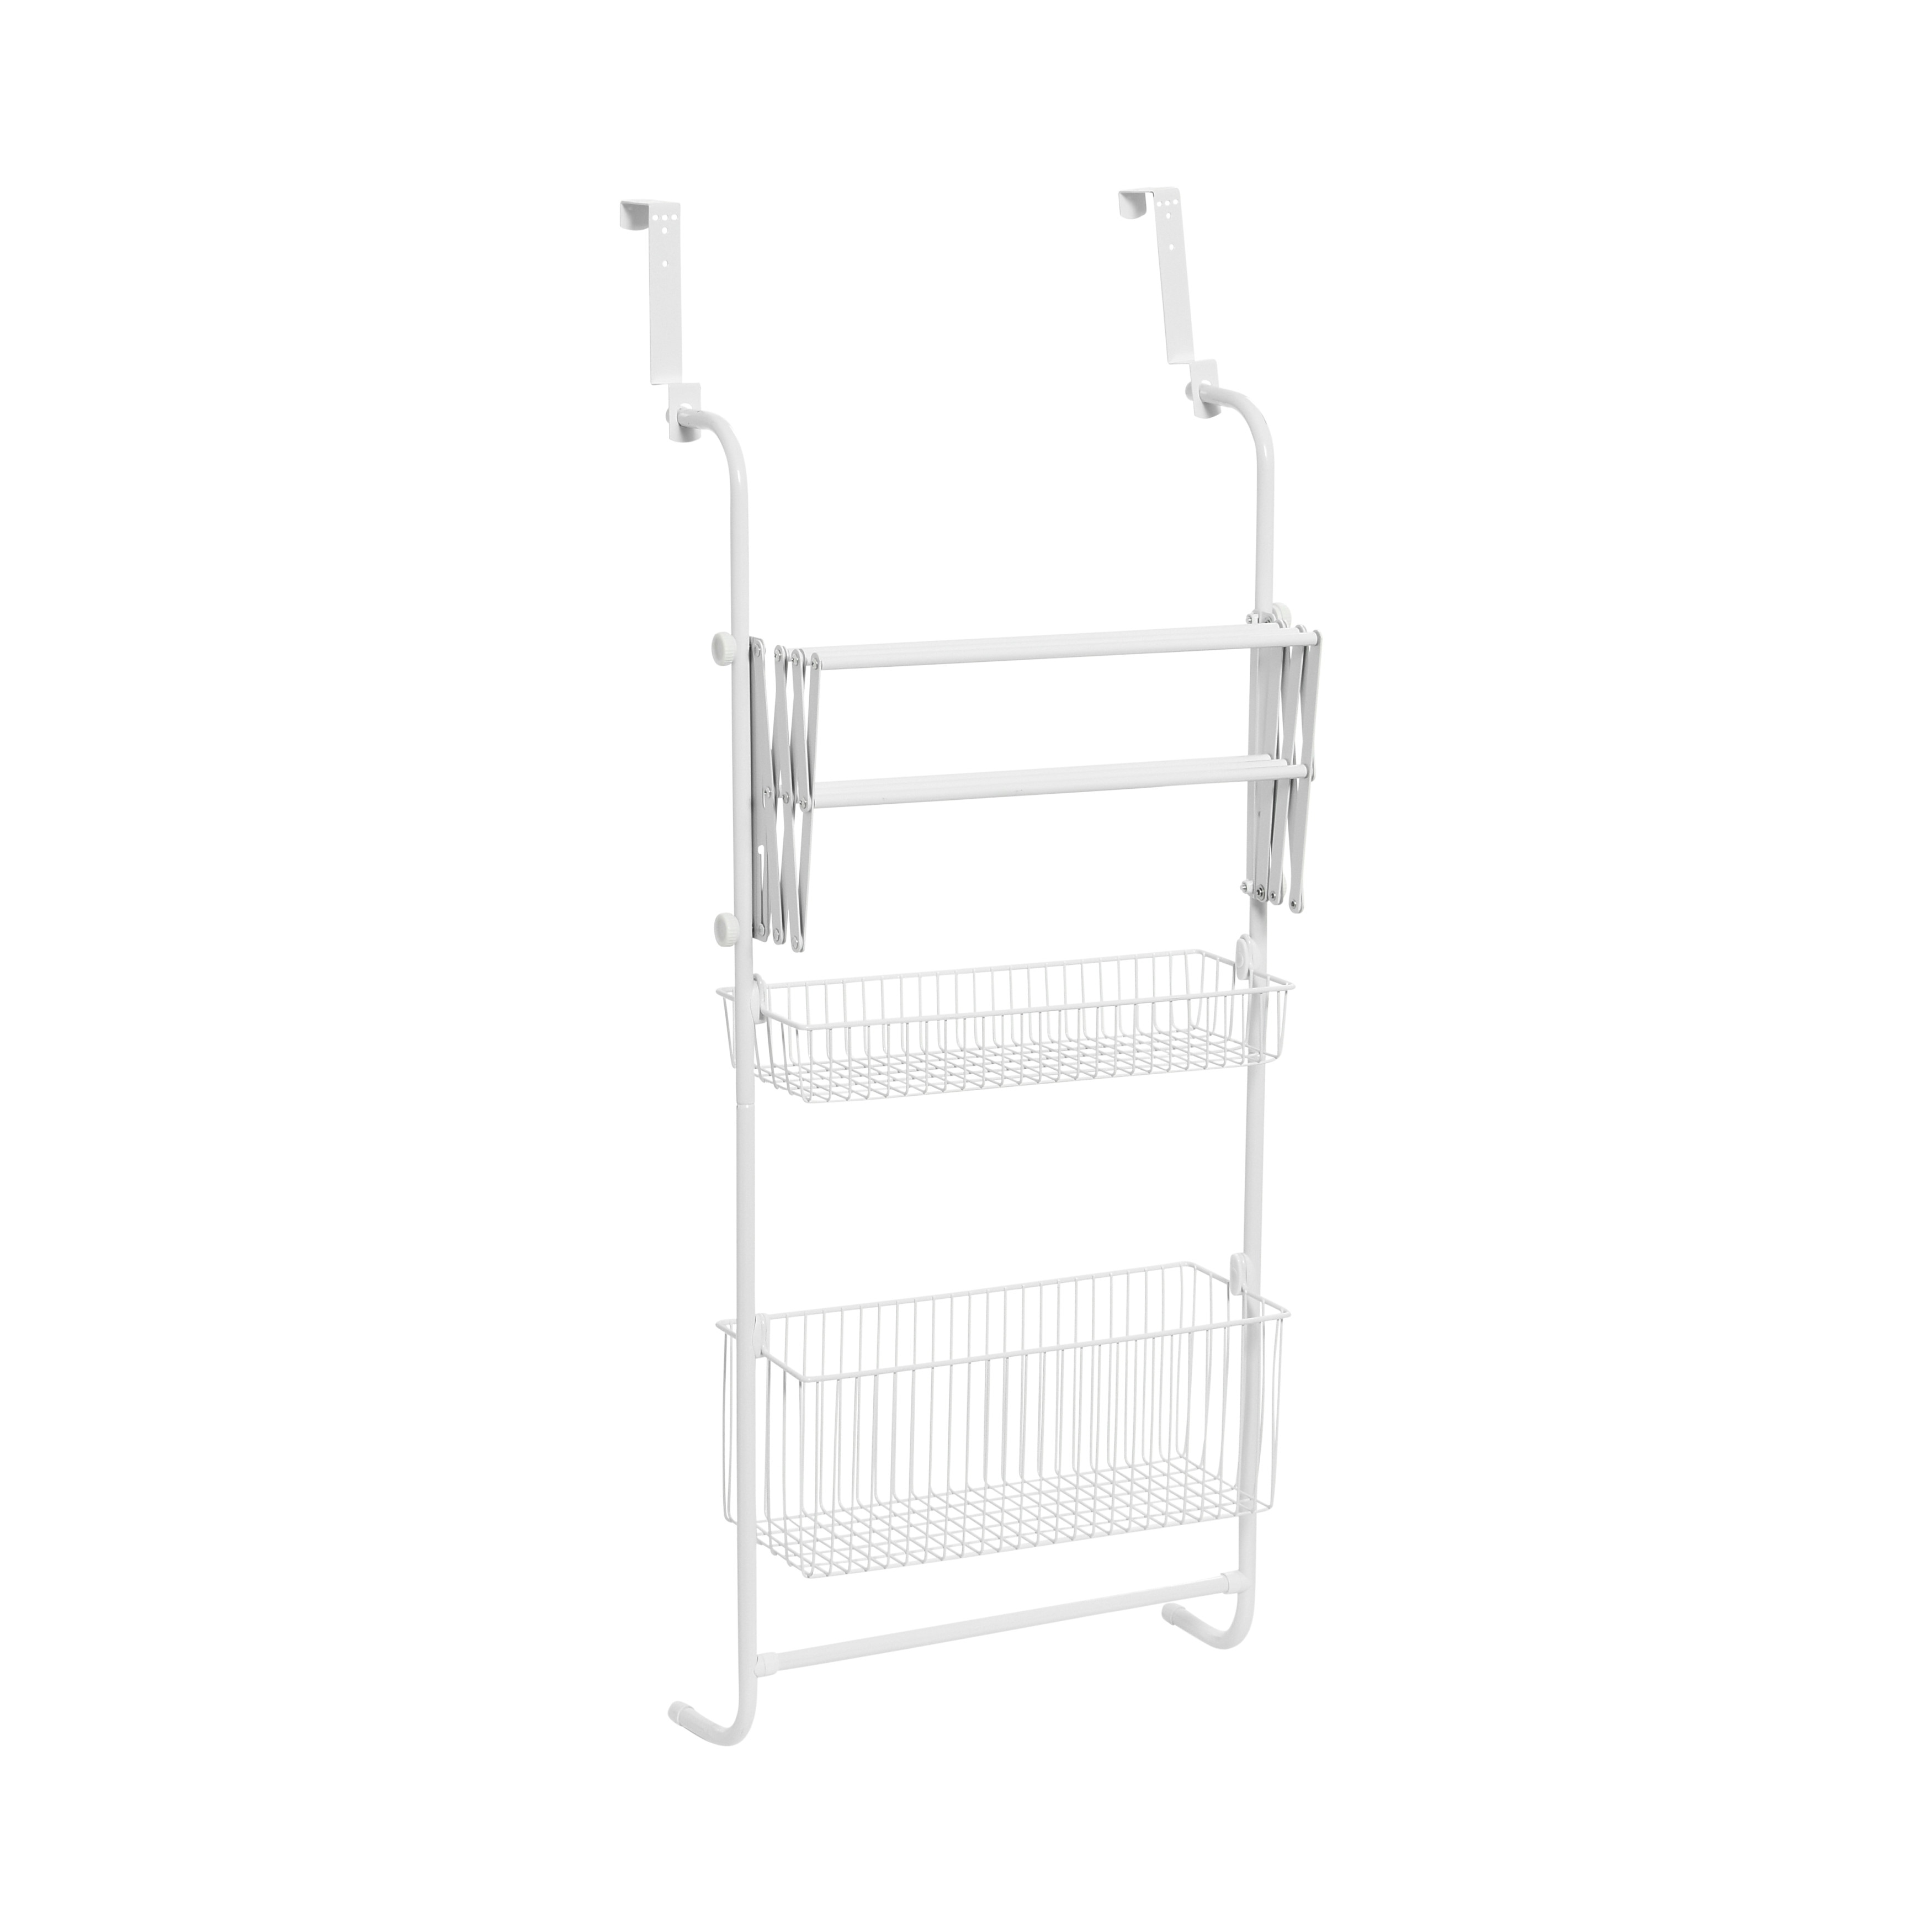 SONGMICS 2-Level Clothes Drying Rack, Stainless Steel Laundry Rack